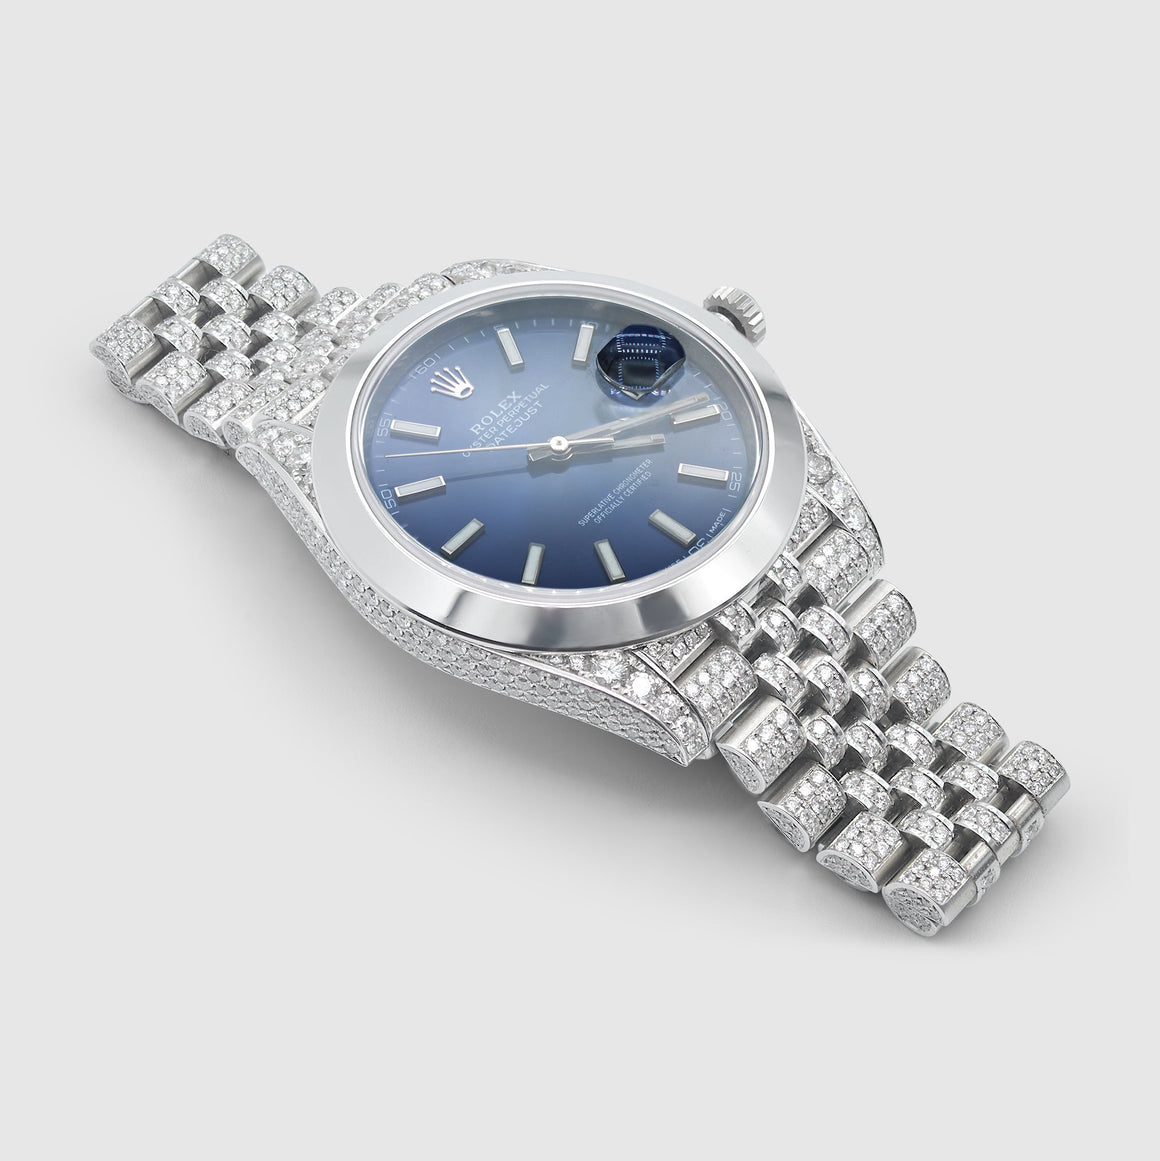 Iced Out DateJust 41mm Stainless Steel Blue Dial Watch